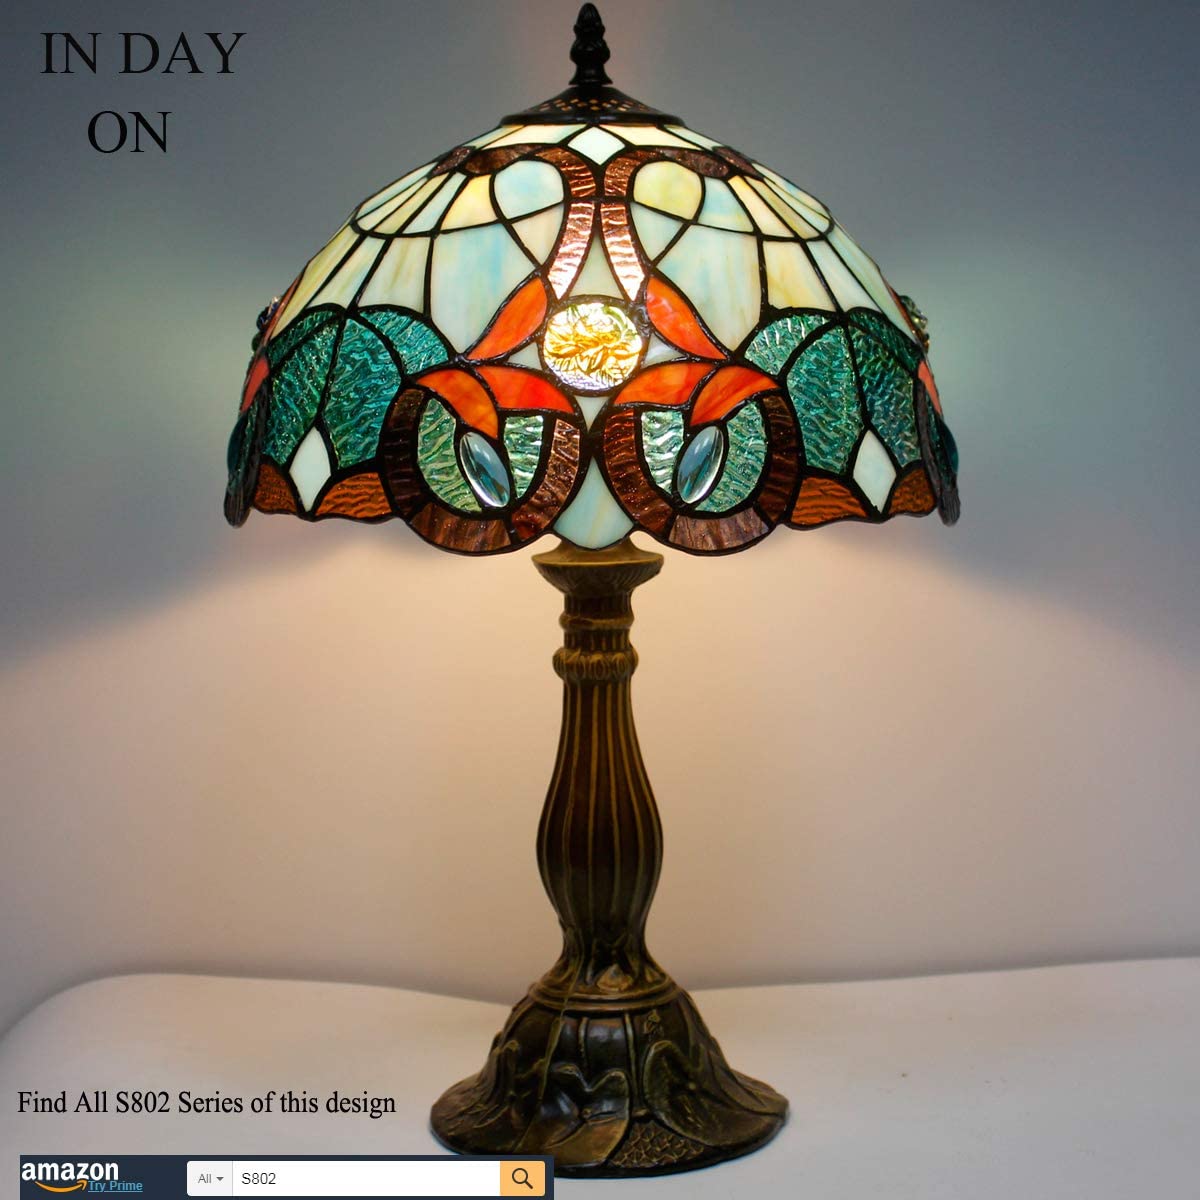 SHADY  Table Lamp Stained Glass Bedside Lamp Green Blue Floral Desk Reading Light 12X12X18 Inches Decor Bedroom Living Room Home Office S802 Series